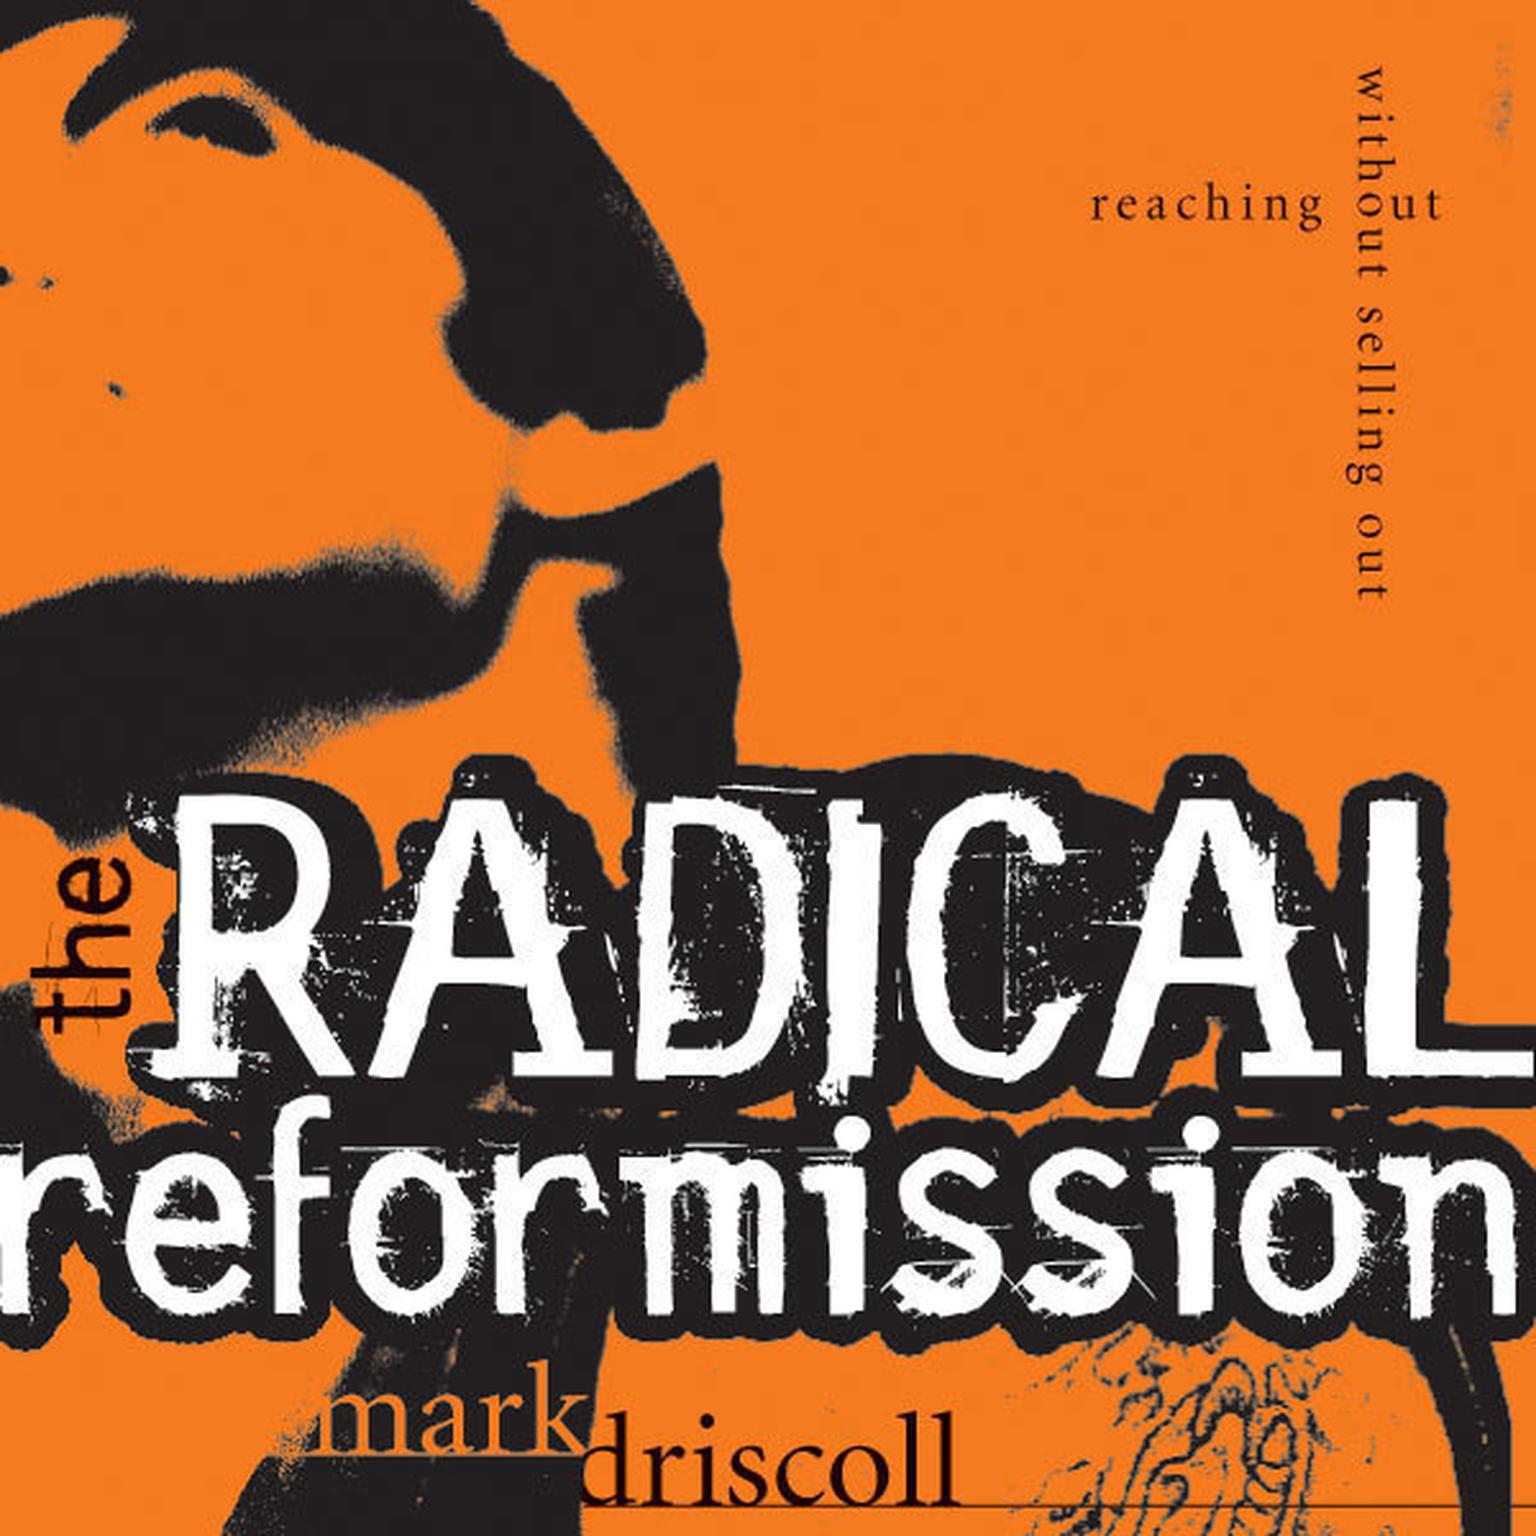 The Radical Reformission: Reaching Out without Selling Out Audiobook, by Mark Driscoll